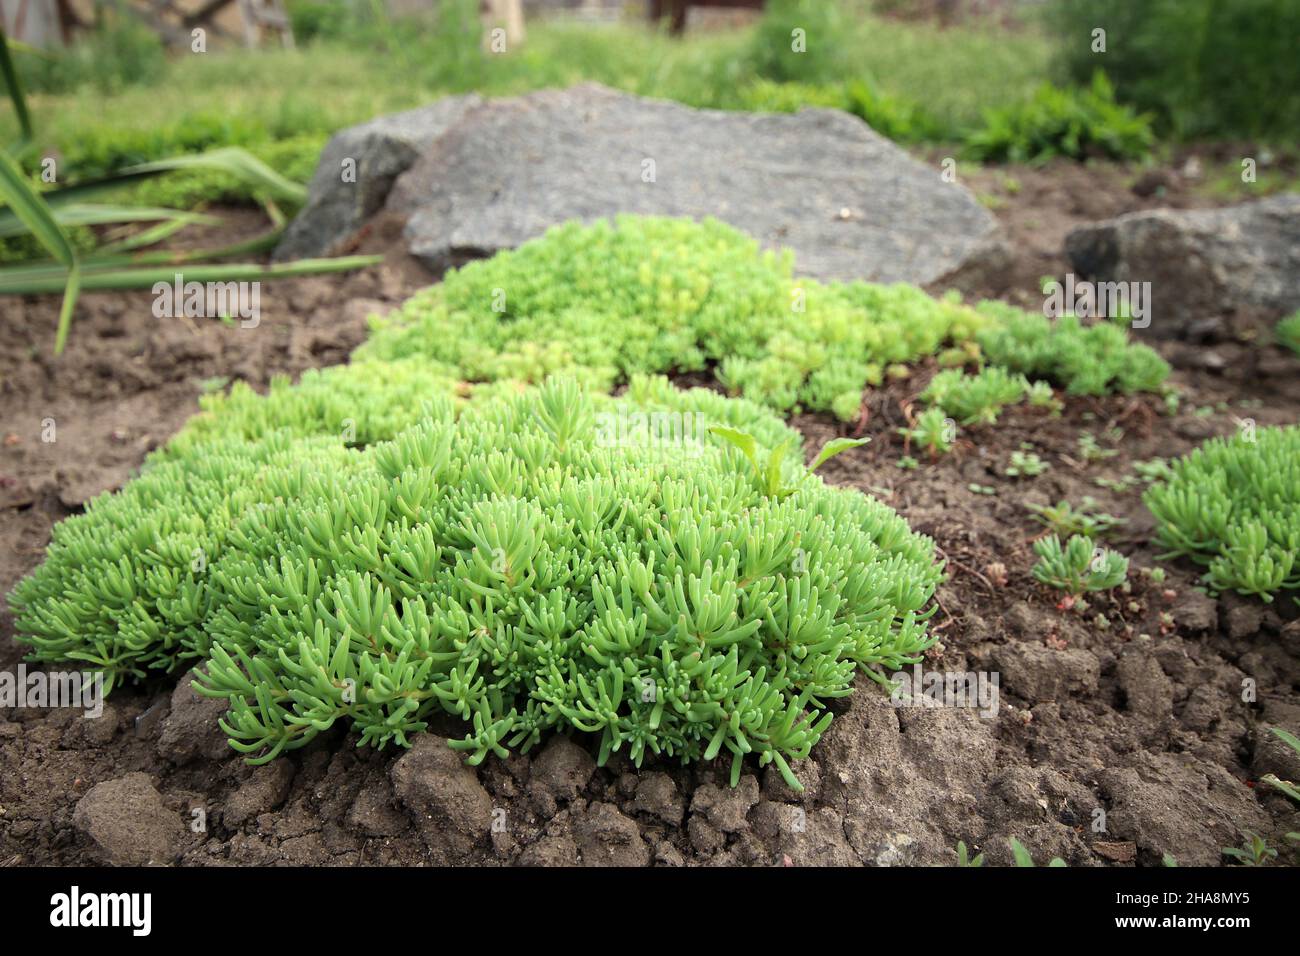 Young shoots of white stonecrop and   palm yucca, growing in flower bed. Sedum album. Stock Photo